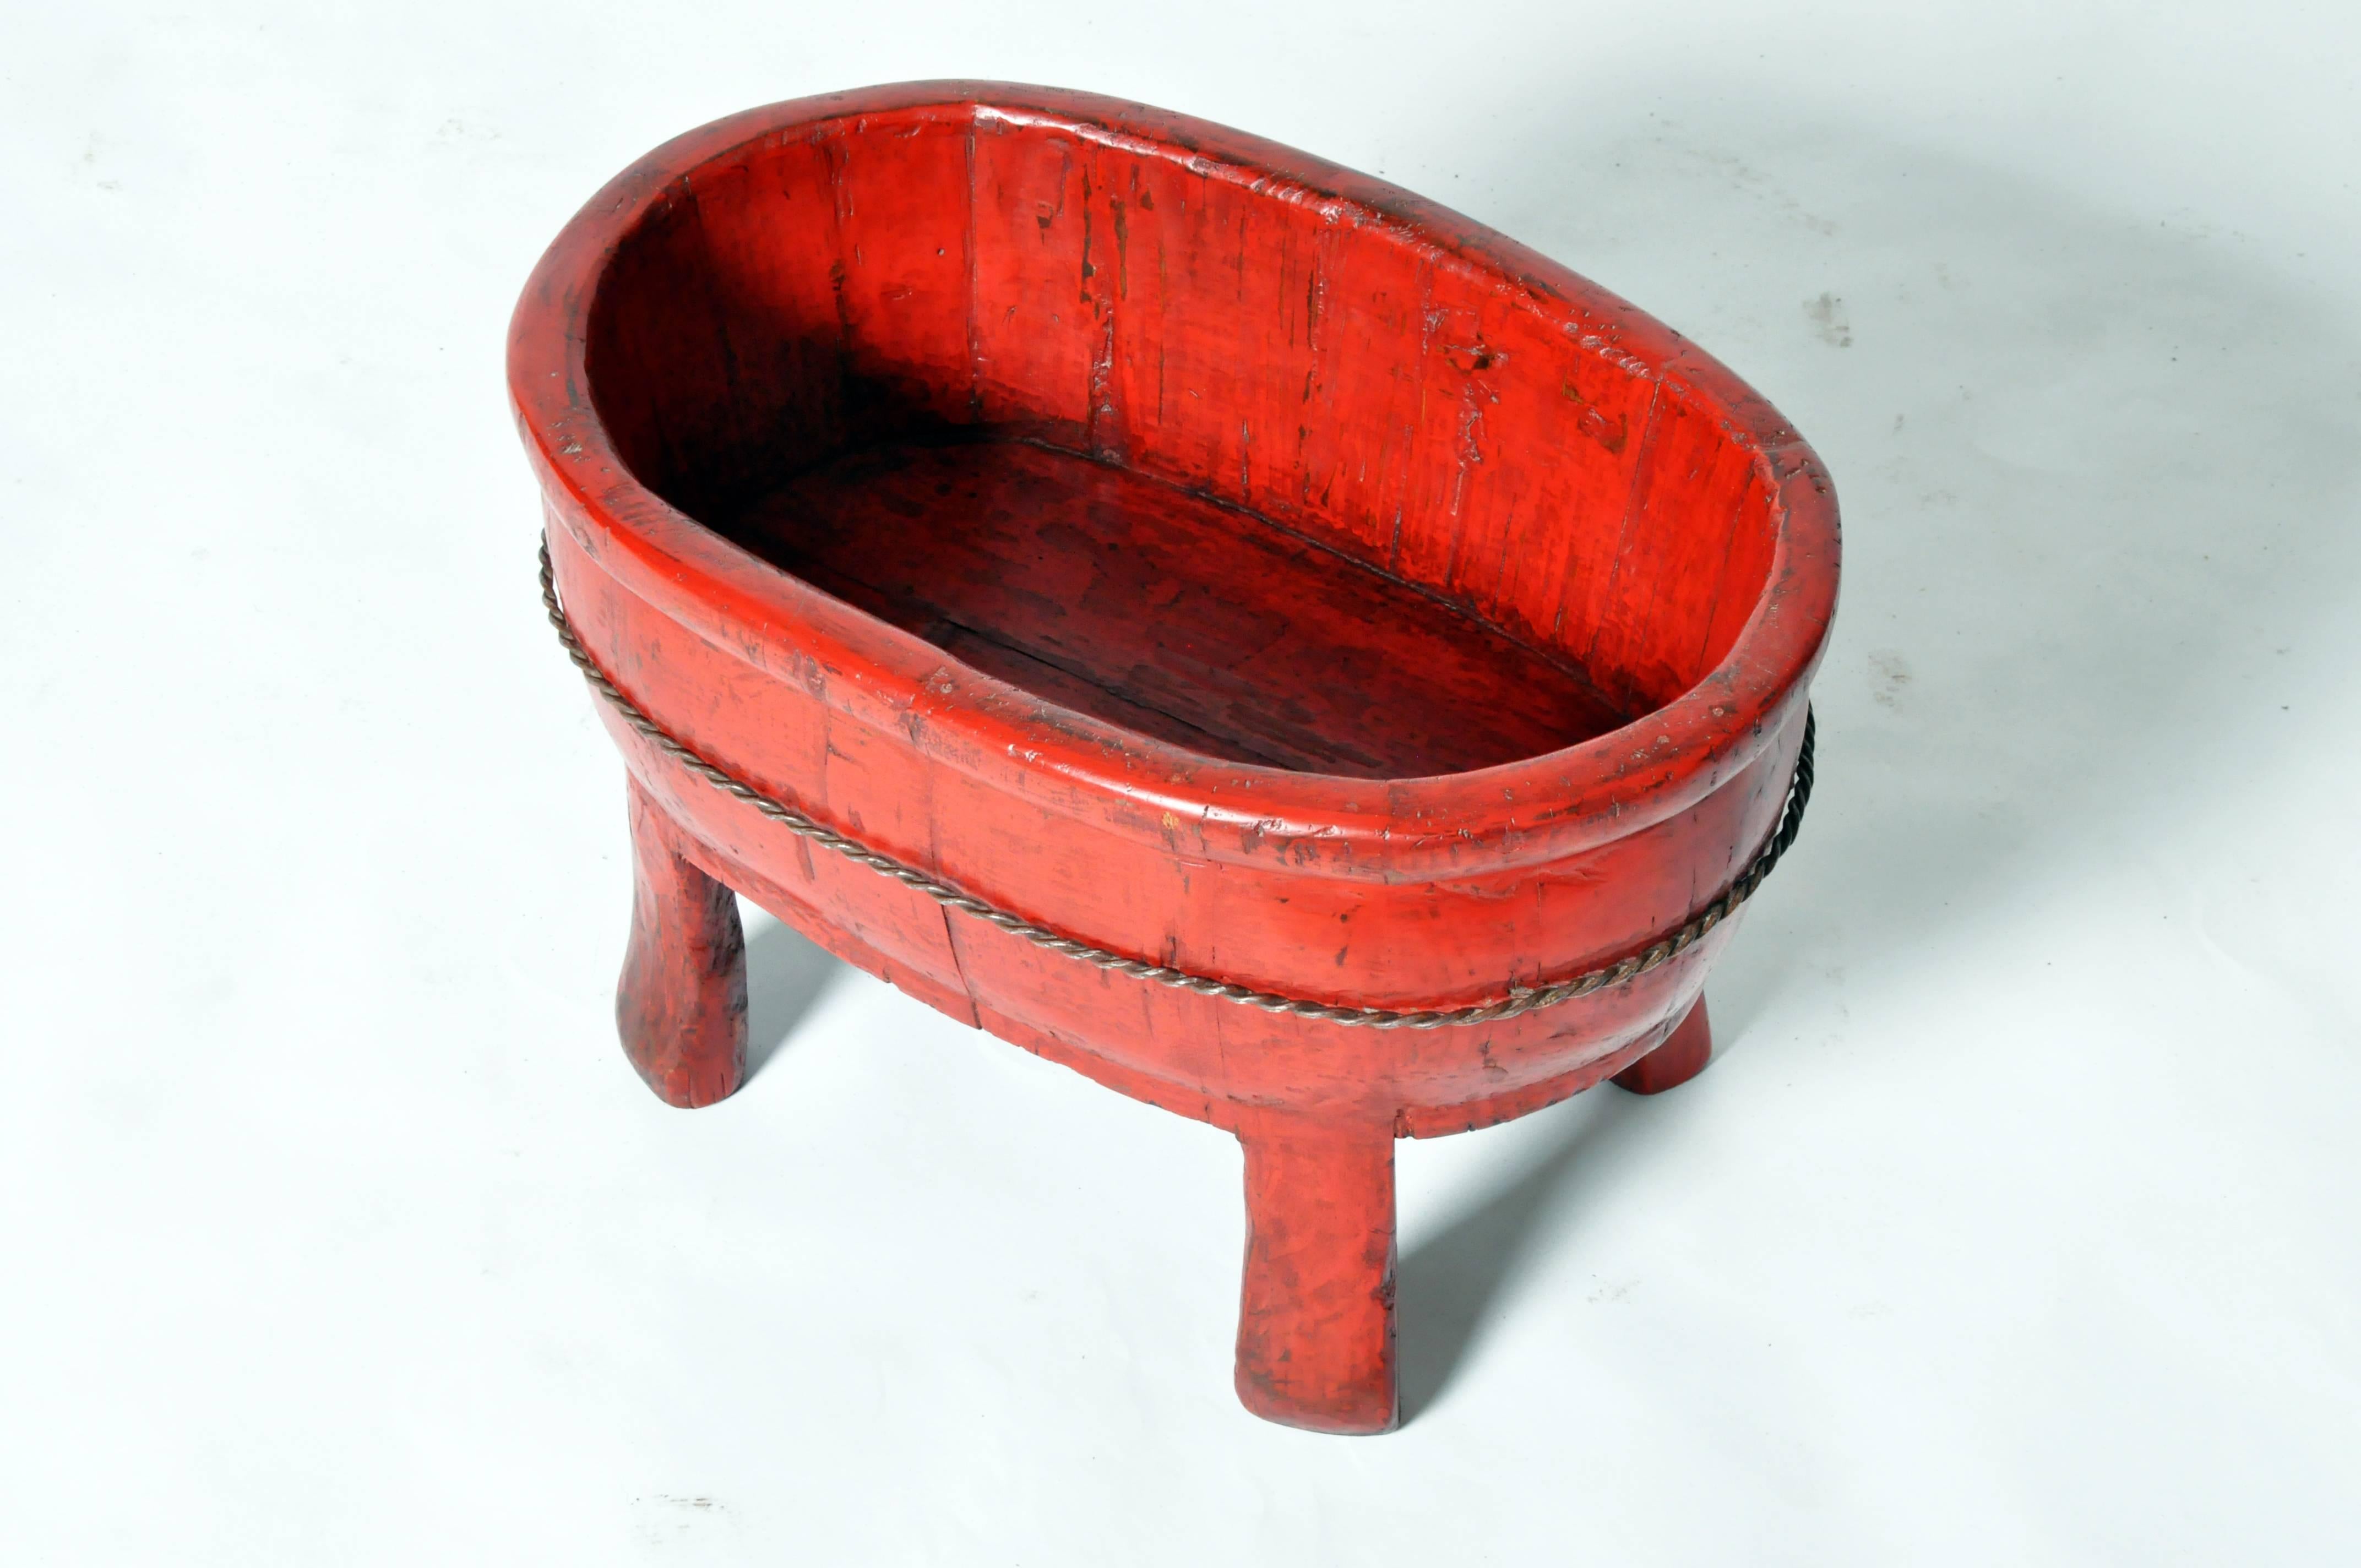 This Chinese basin is from Zhejiang, China and is made from fir wood.